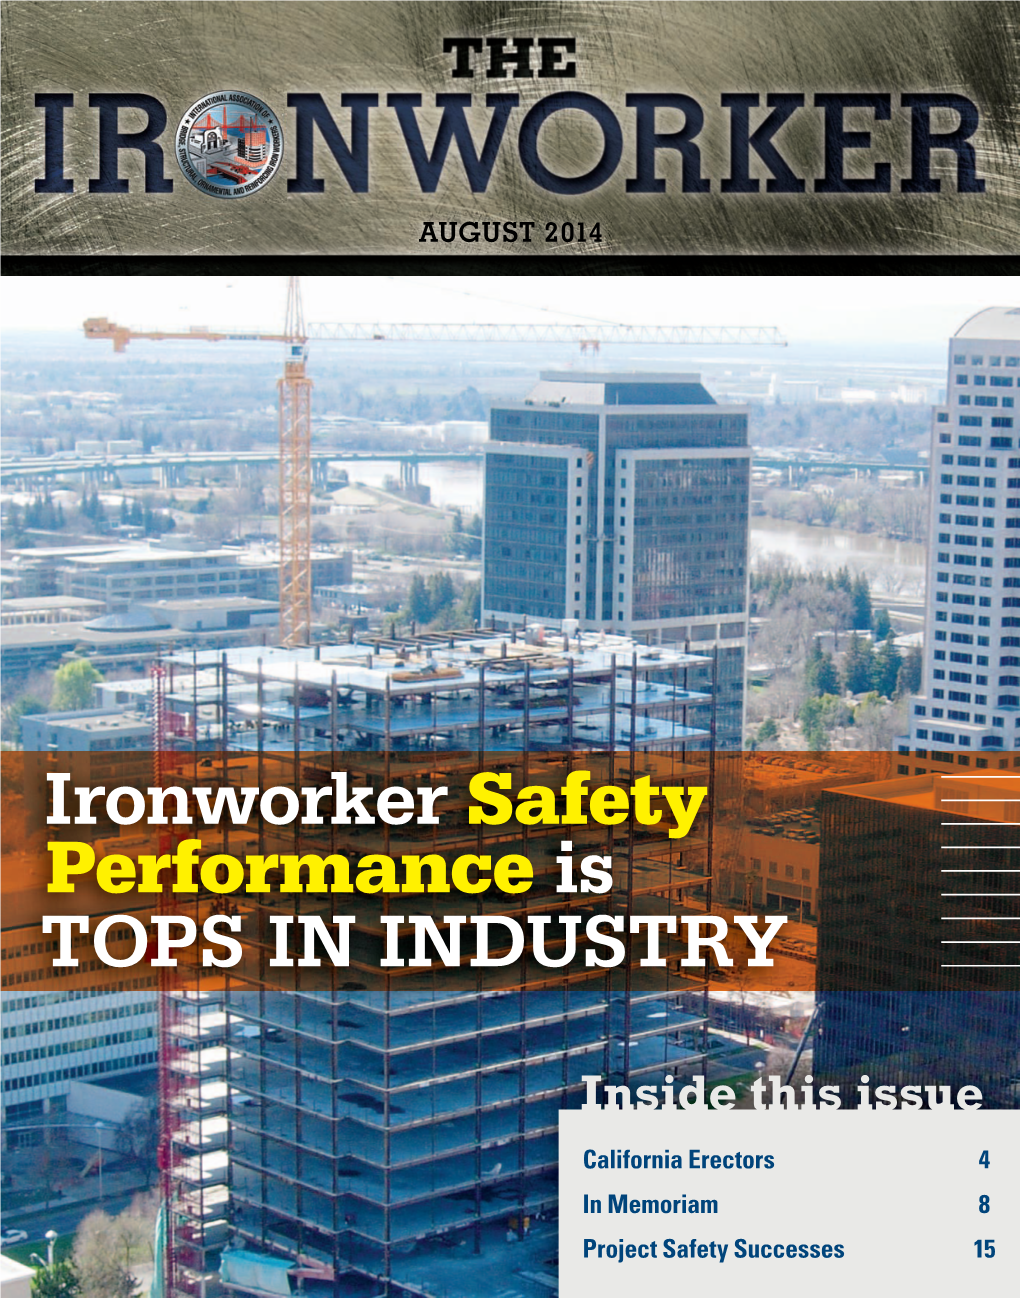 Ironworker Safety Performance Is TOPS in INDUSTRY